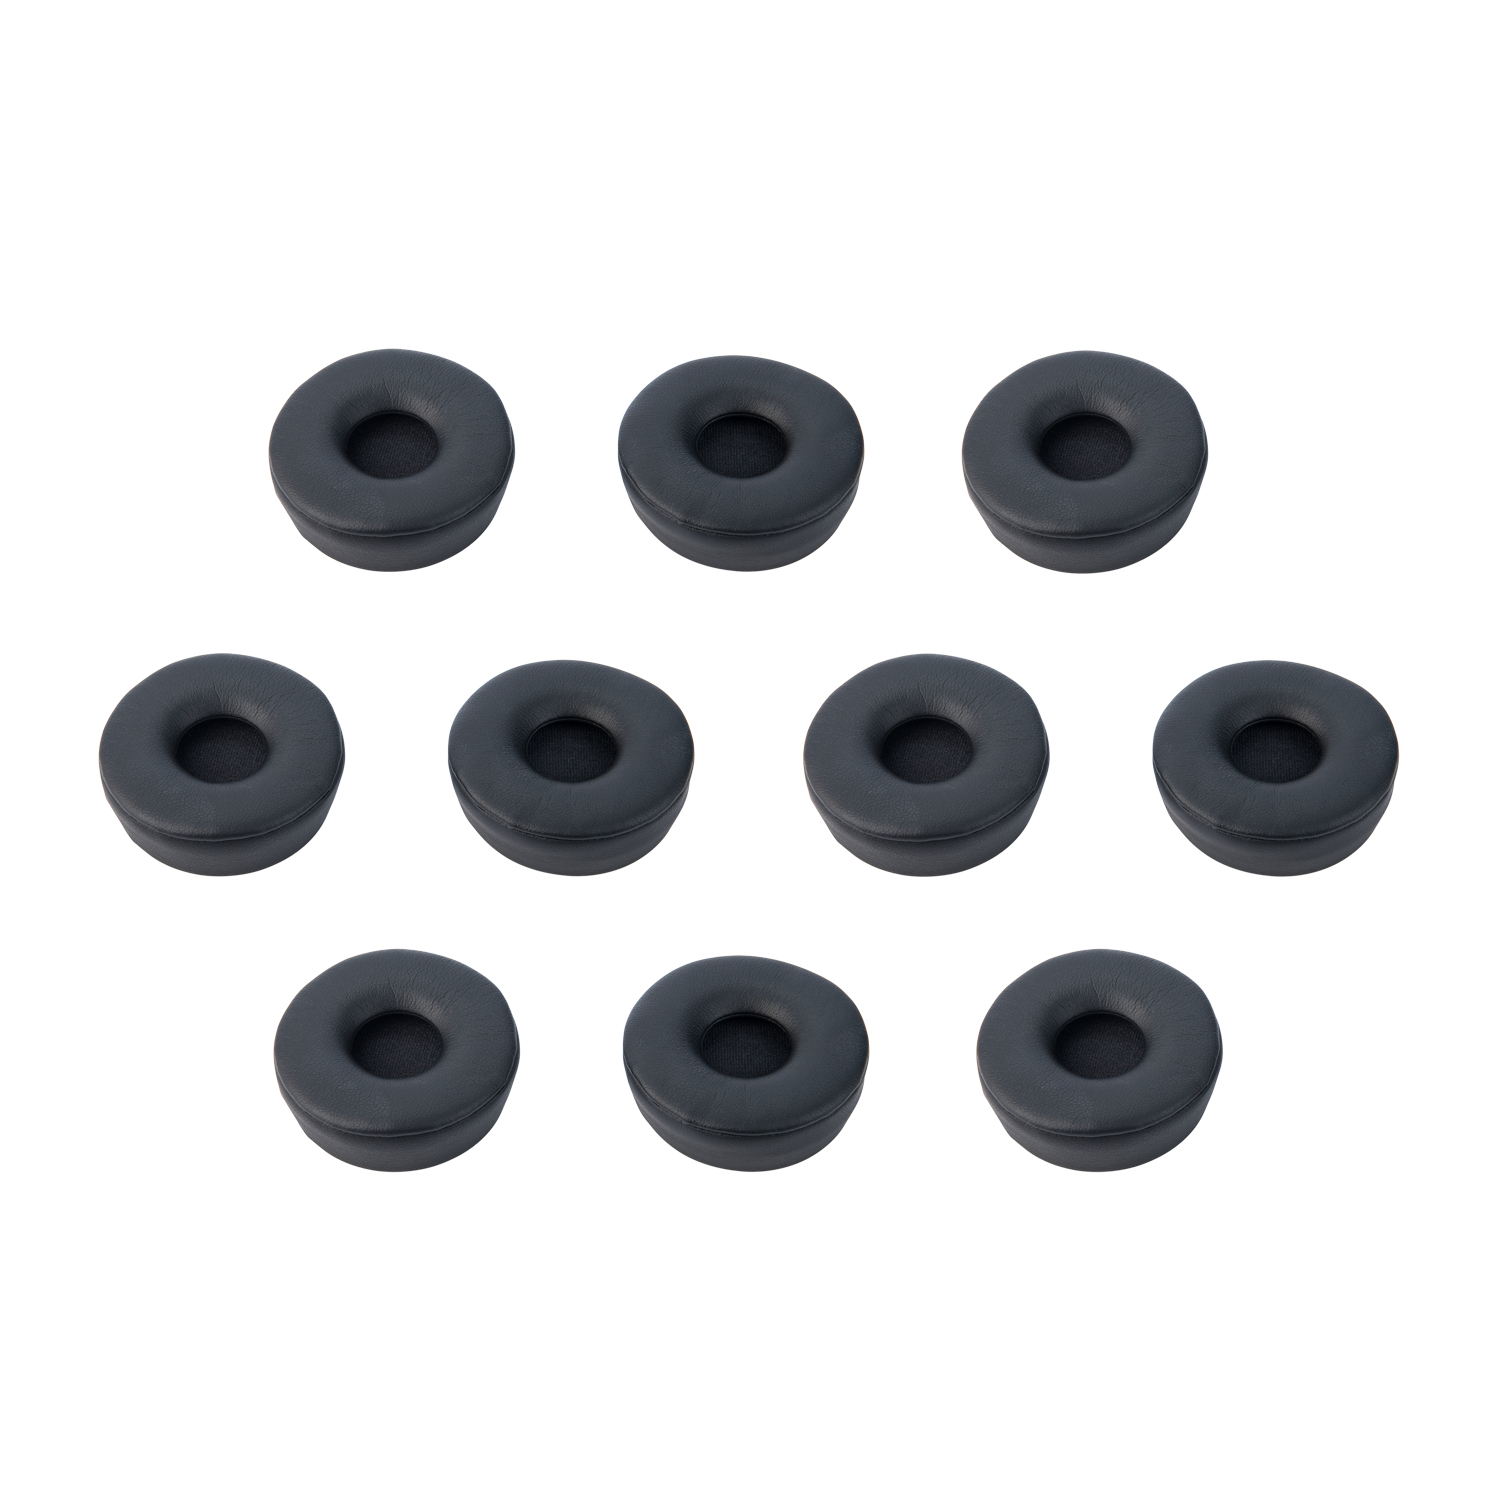 Jabra Engage Ear Cushions – 10 pieces for Mono headset